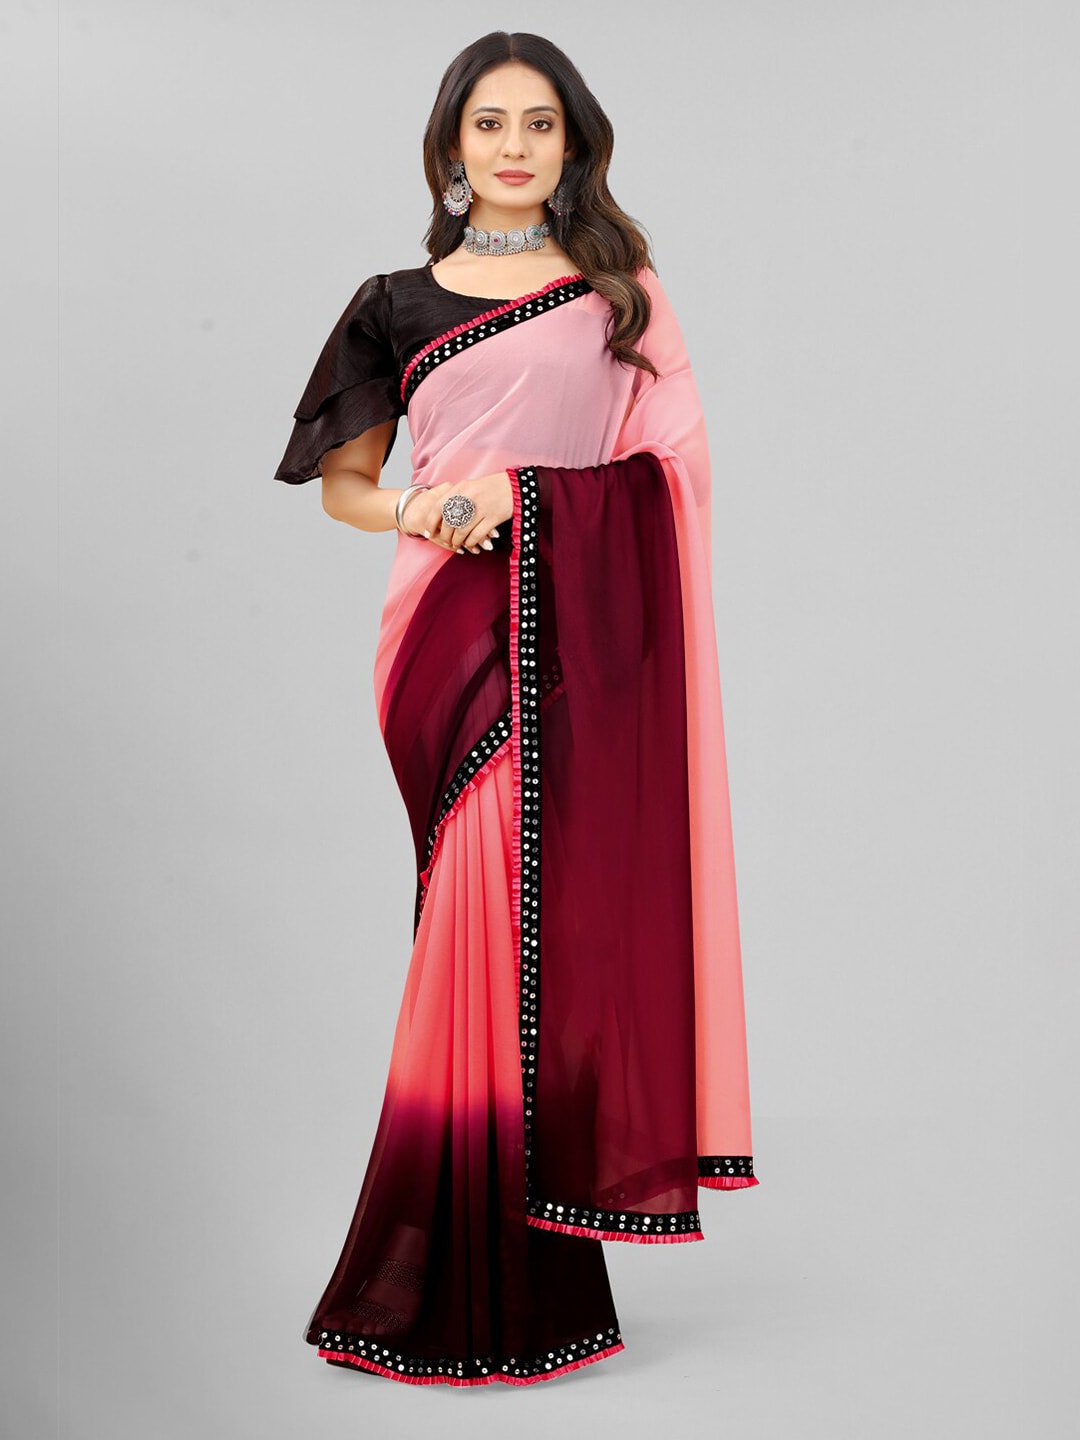 Omicron Fab Peach-Coloured & Black Ombre Pure Georgette Saree With Lace Work Saree Price in India